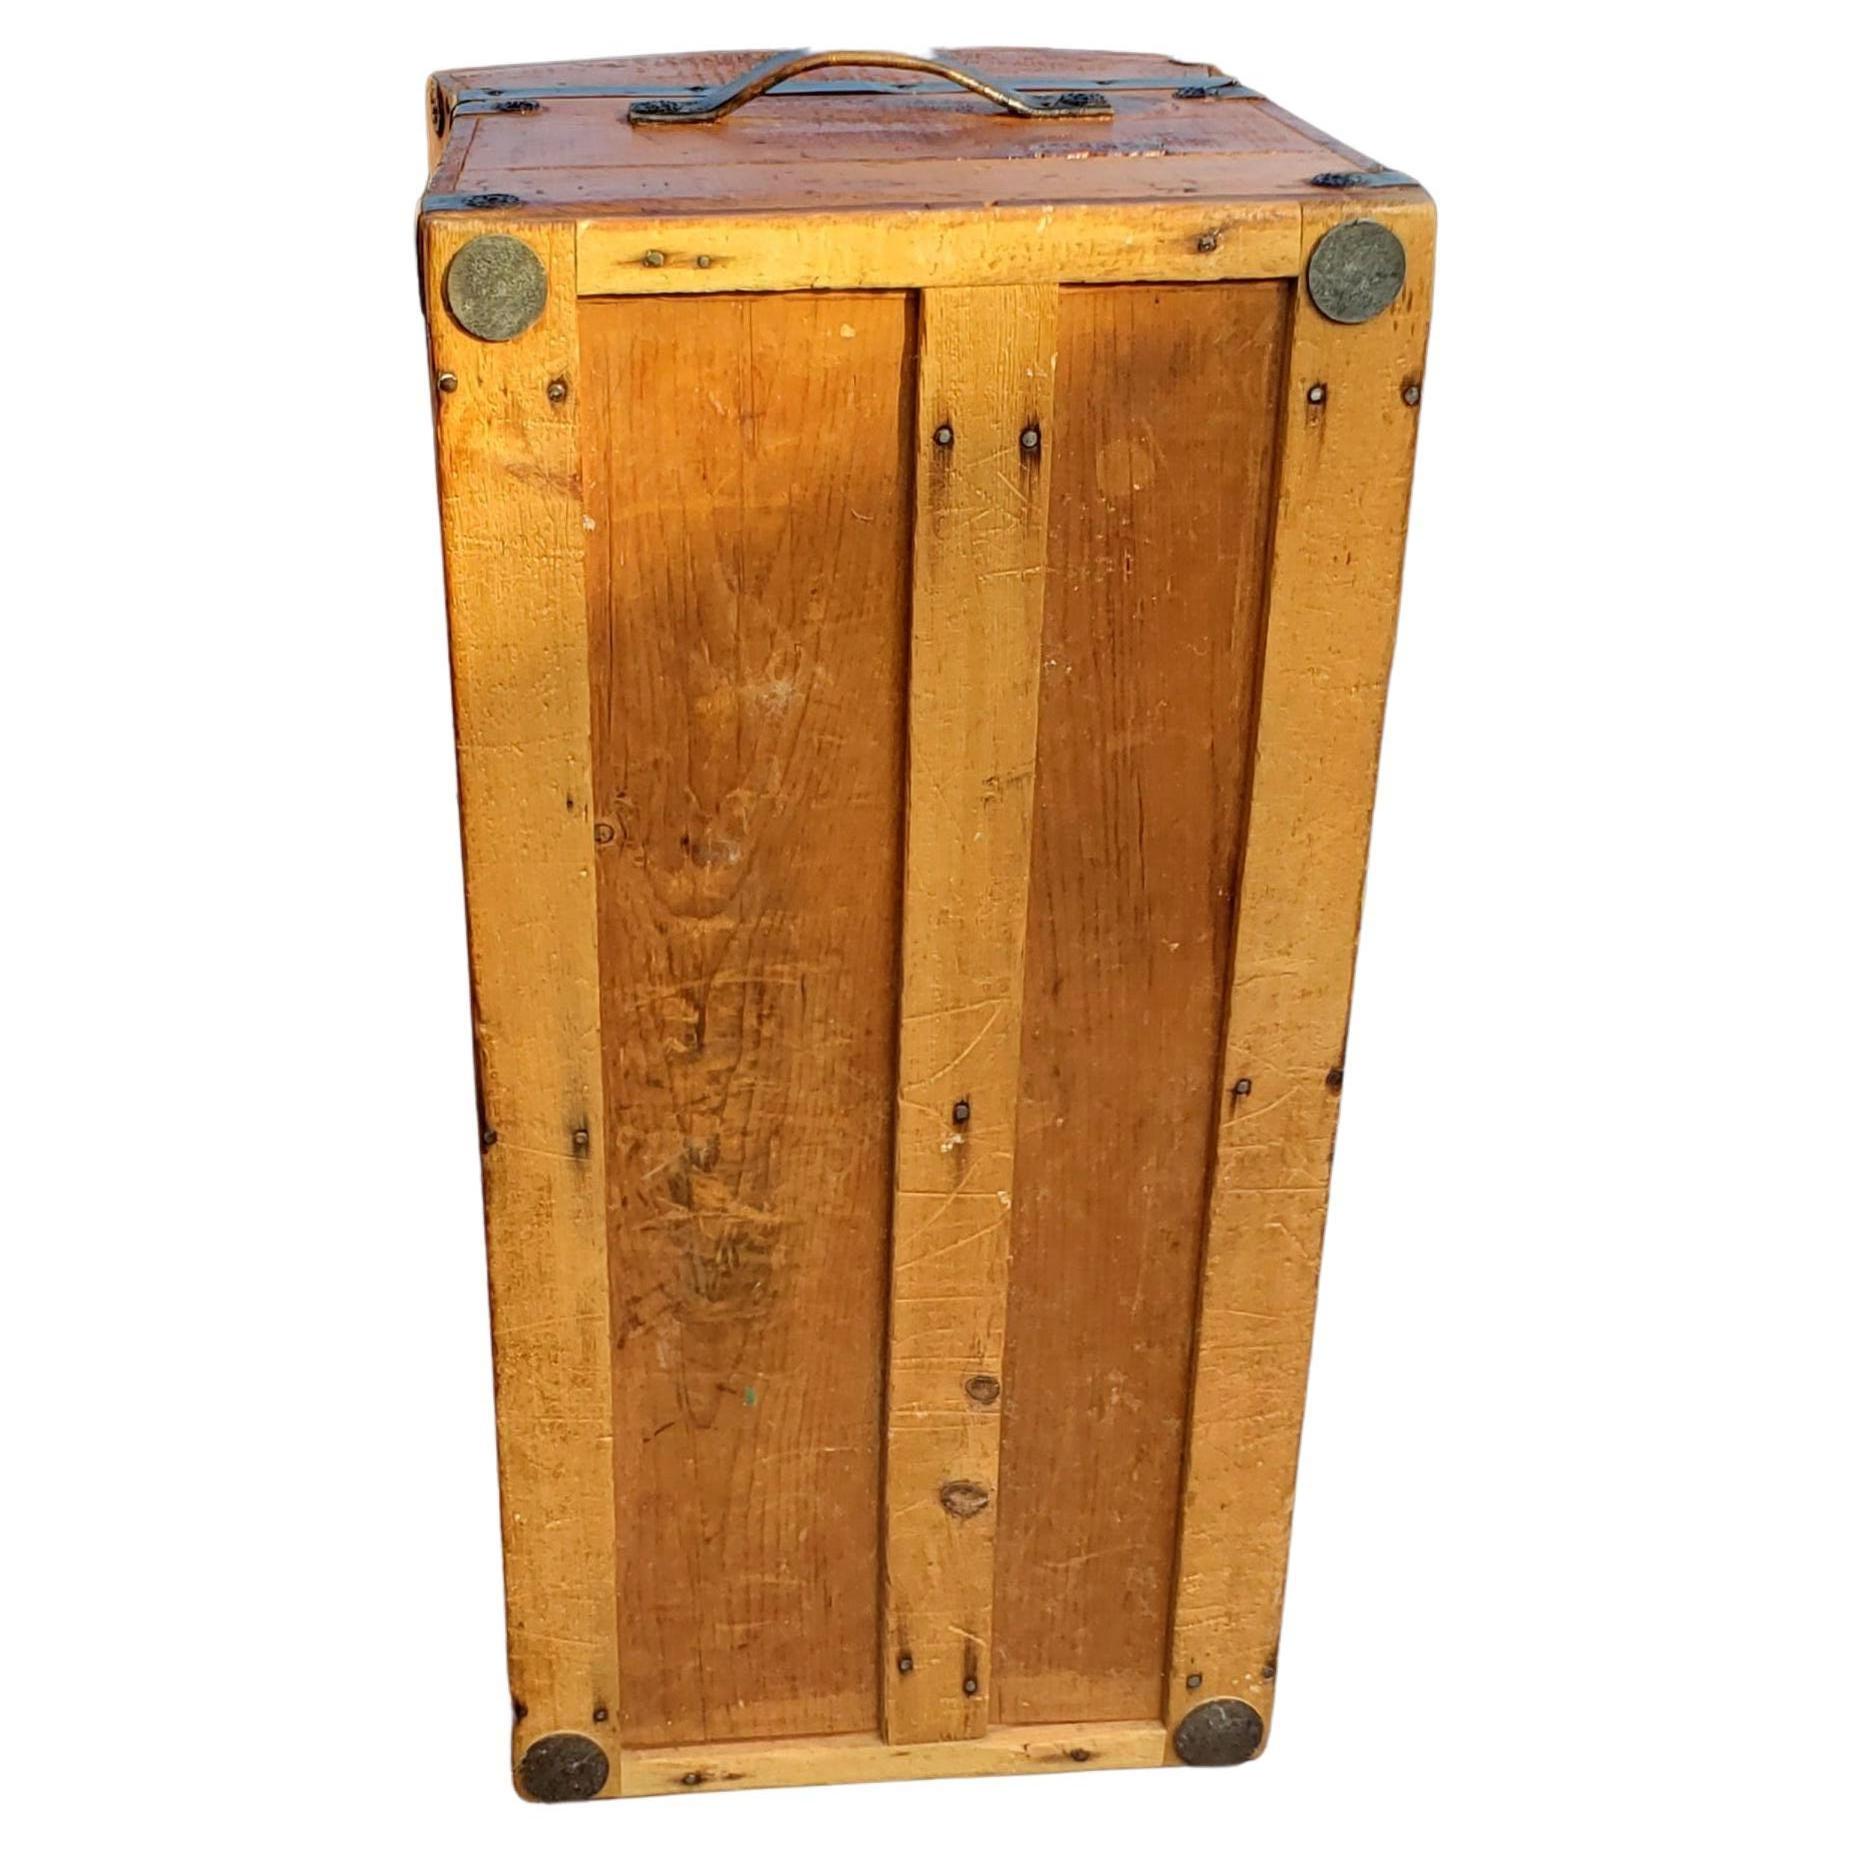 Vintage American Pine Trunk with Solid Wooden Handles, circa 1960s For Sale 1